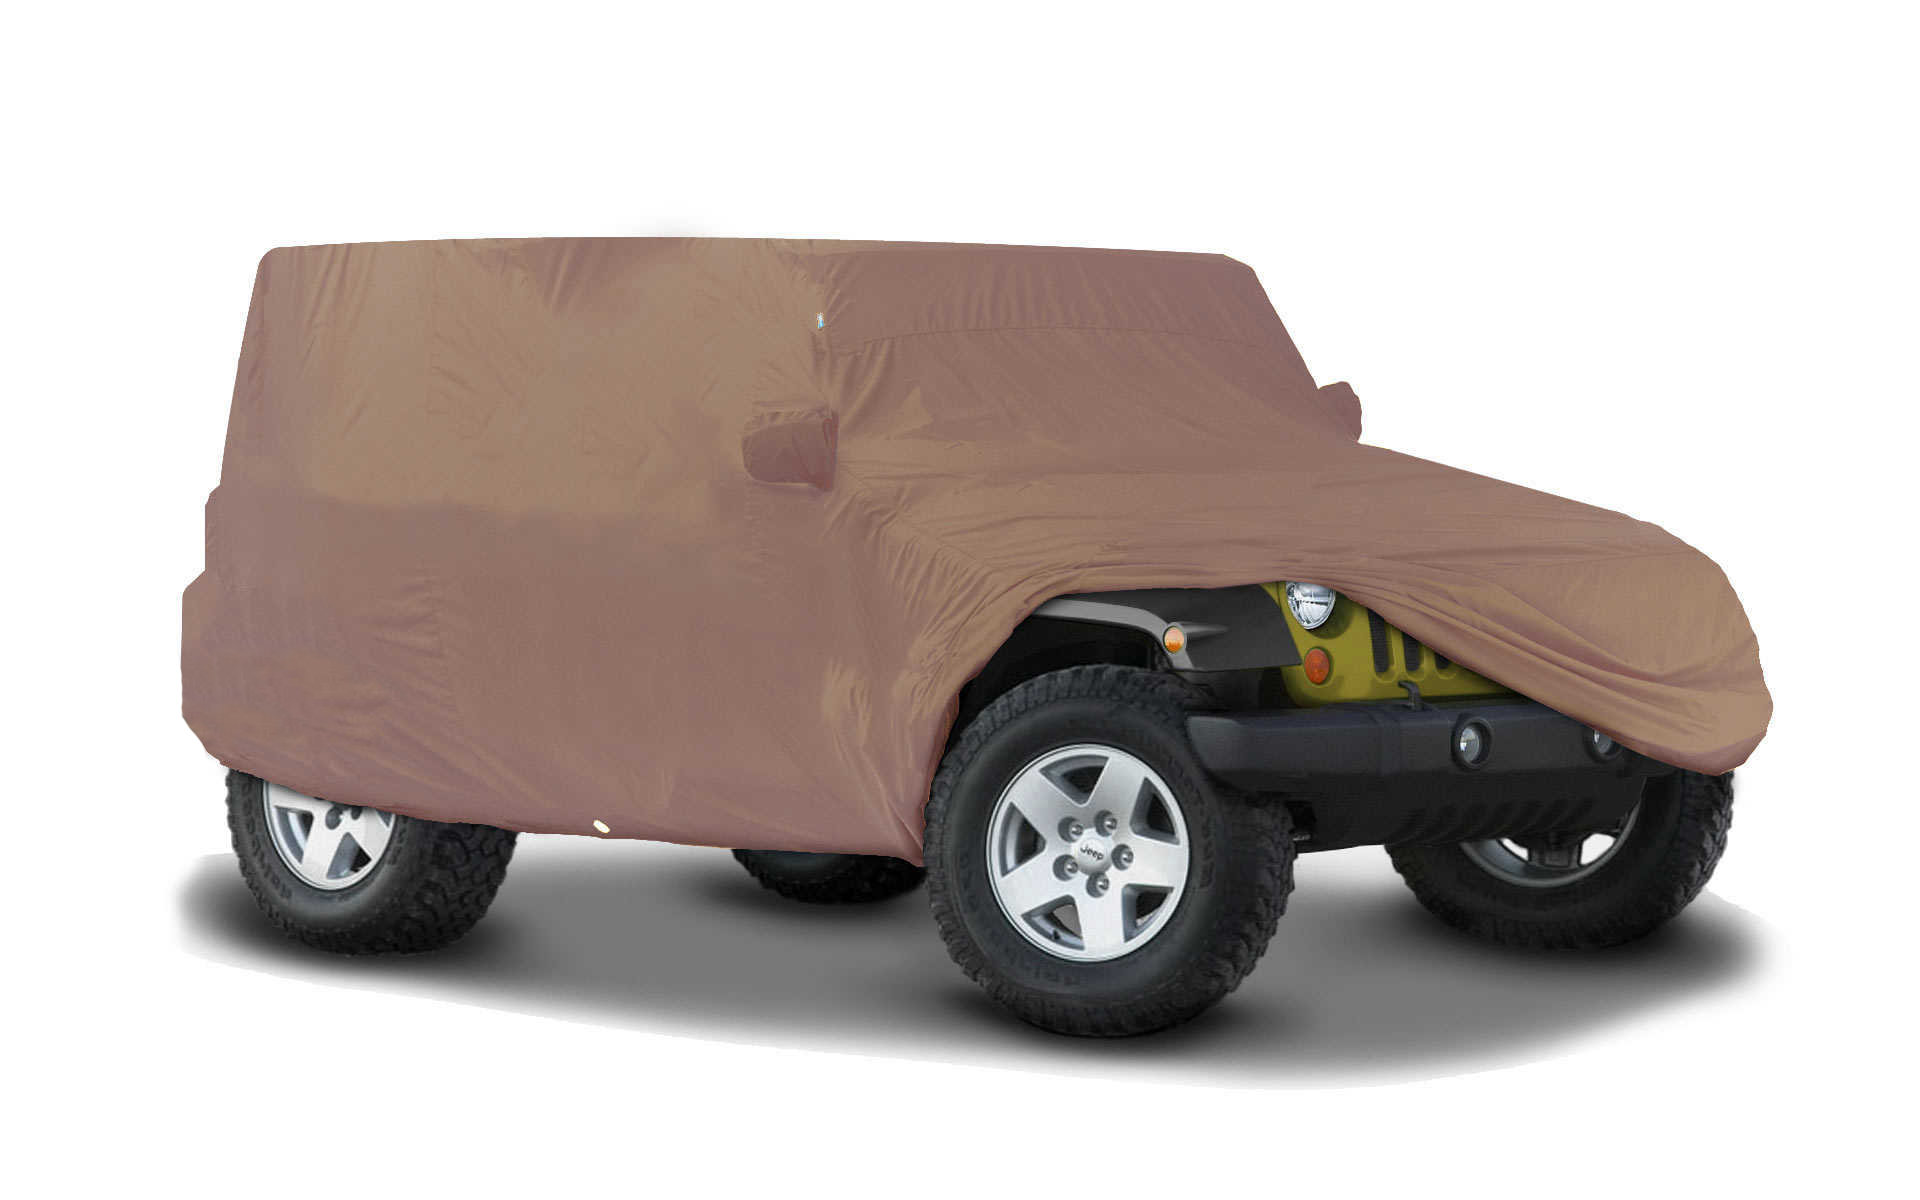 Covercraft Custom Car Covers Block-it 380 Indoor/Outdoor Available in Tan